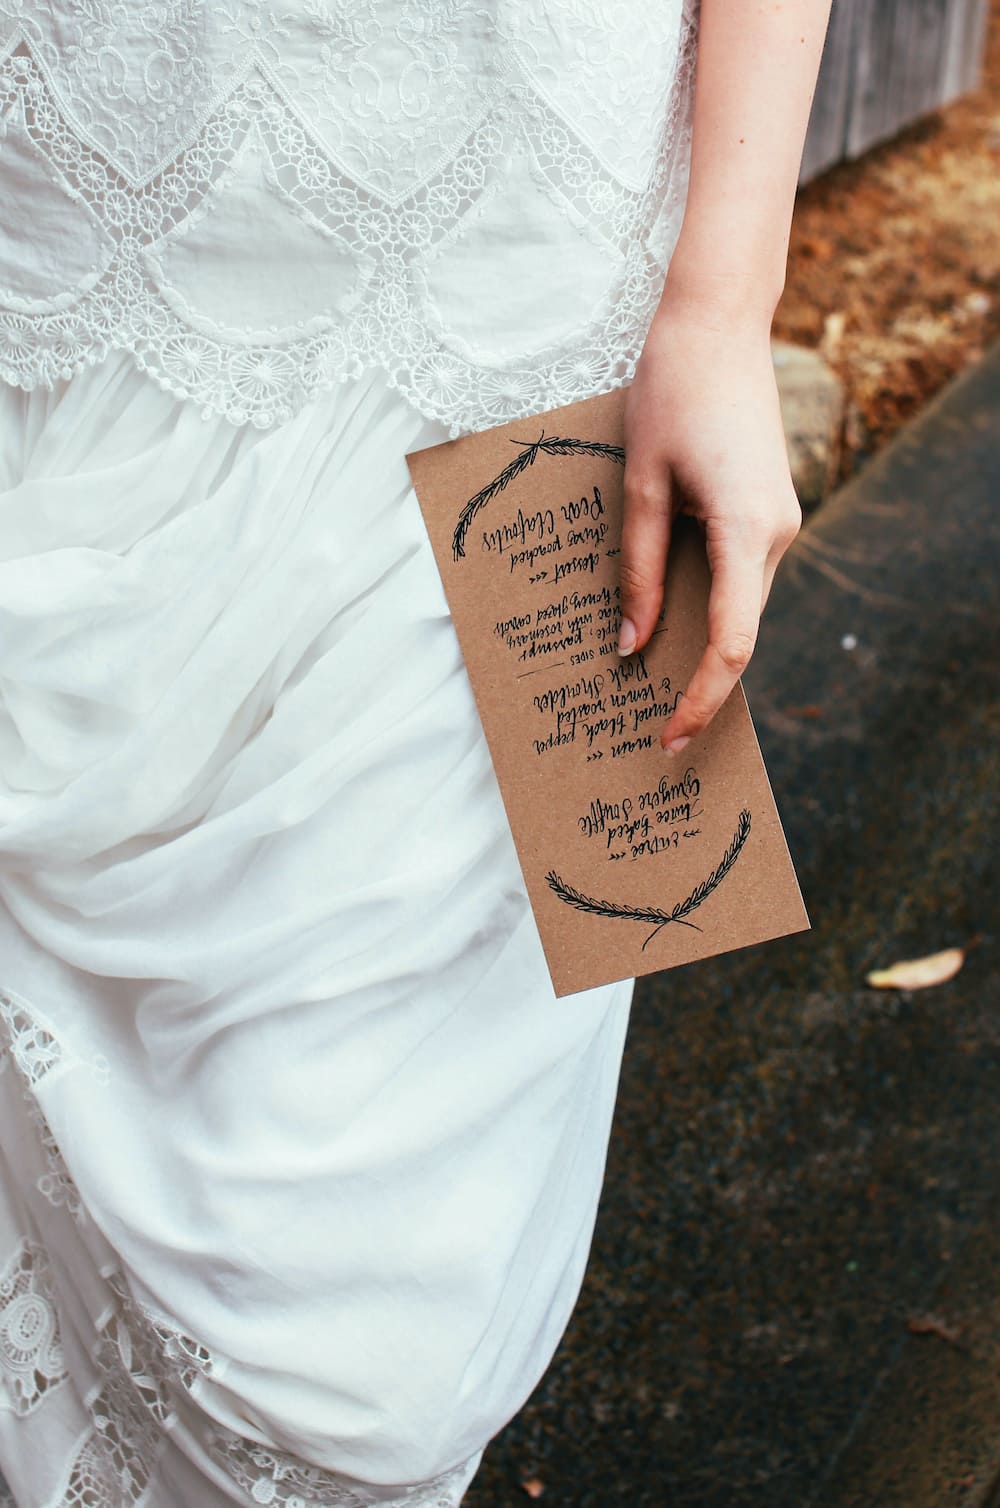 Wedding invitation email to colleagues: 10 best samples 